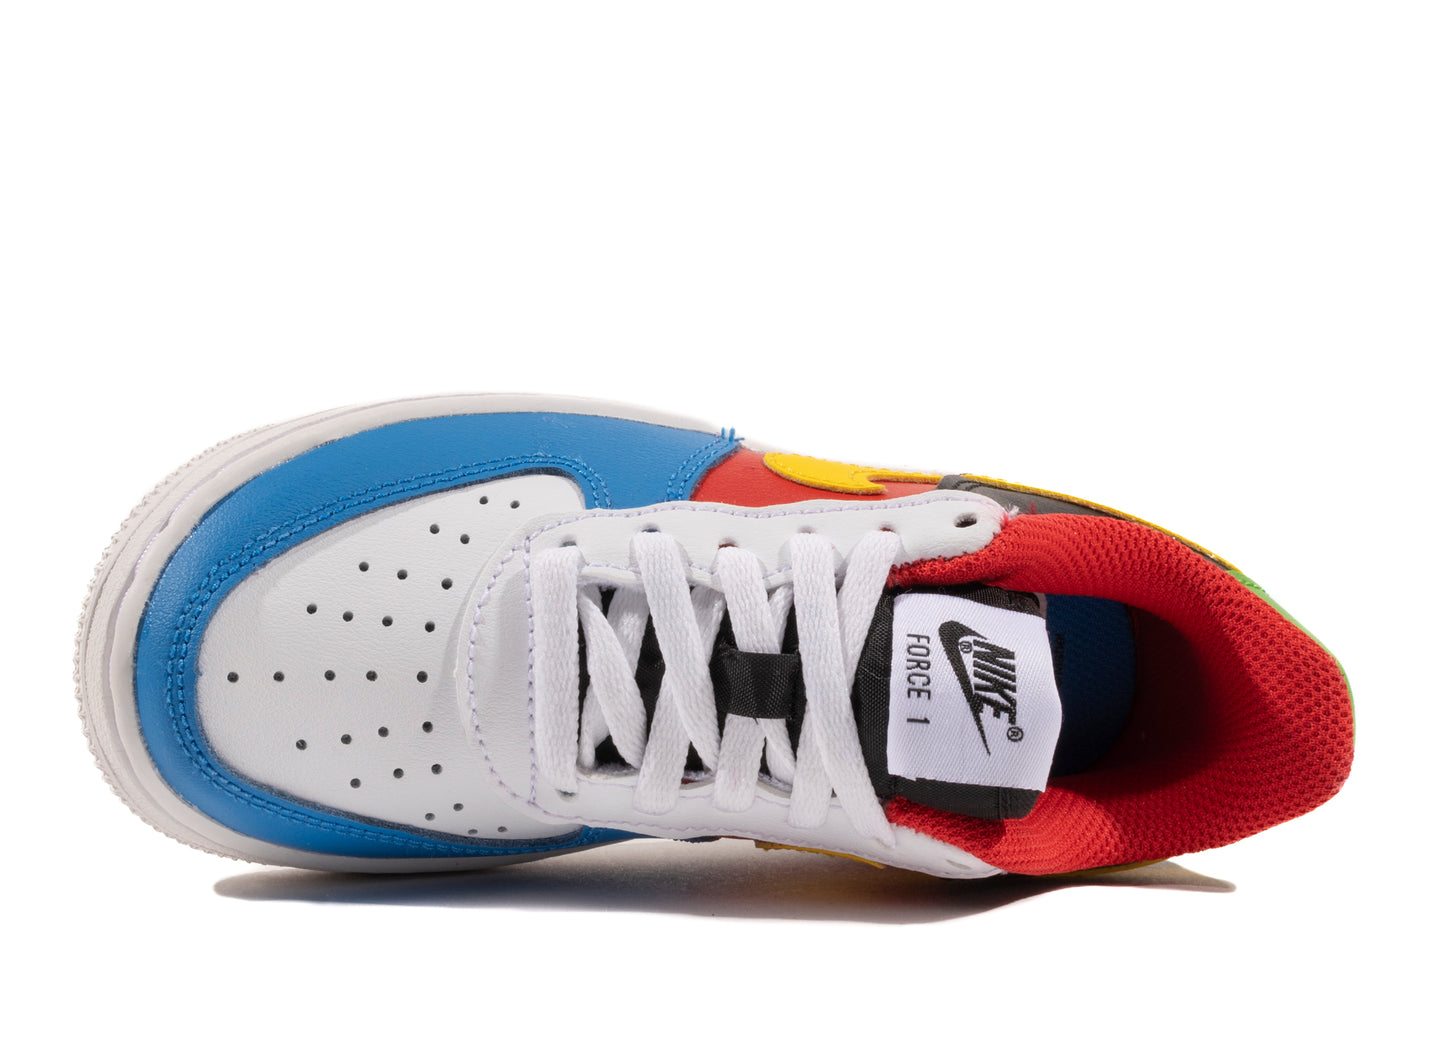 PS Nike Air Force 1 LV8 'UNO'